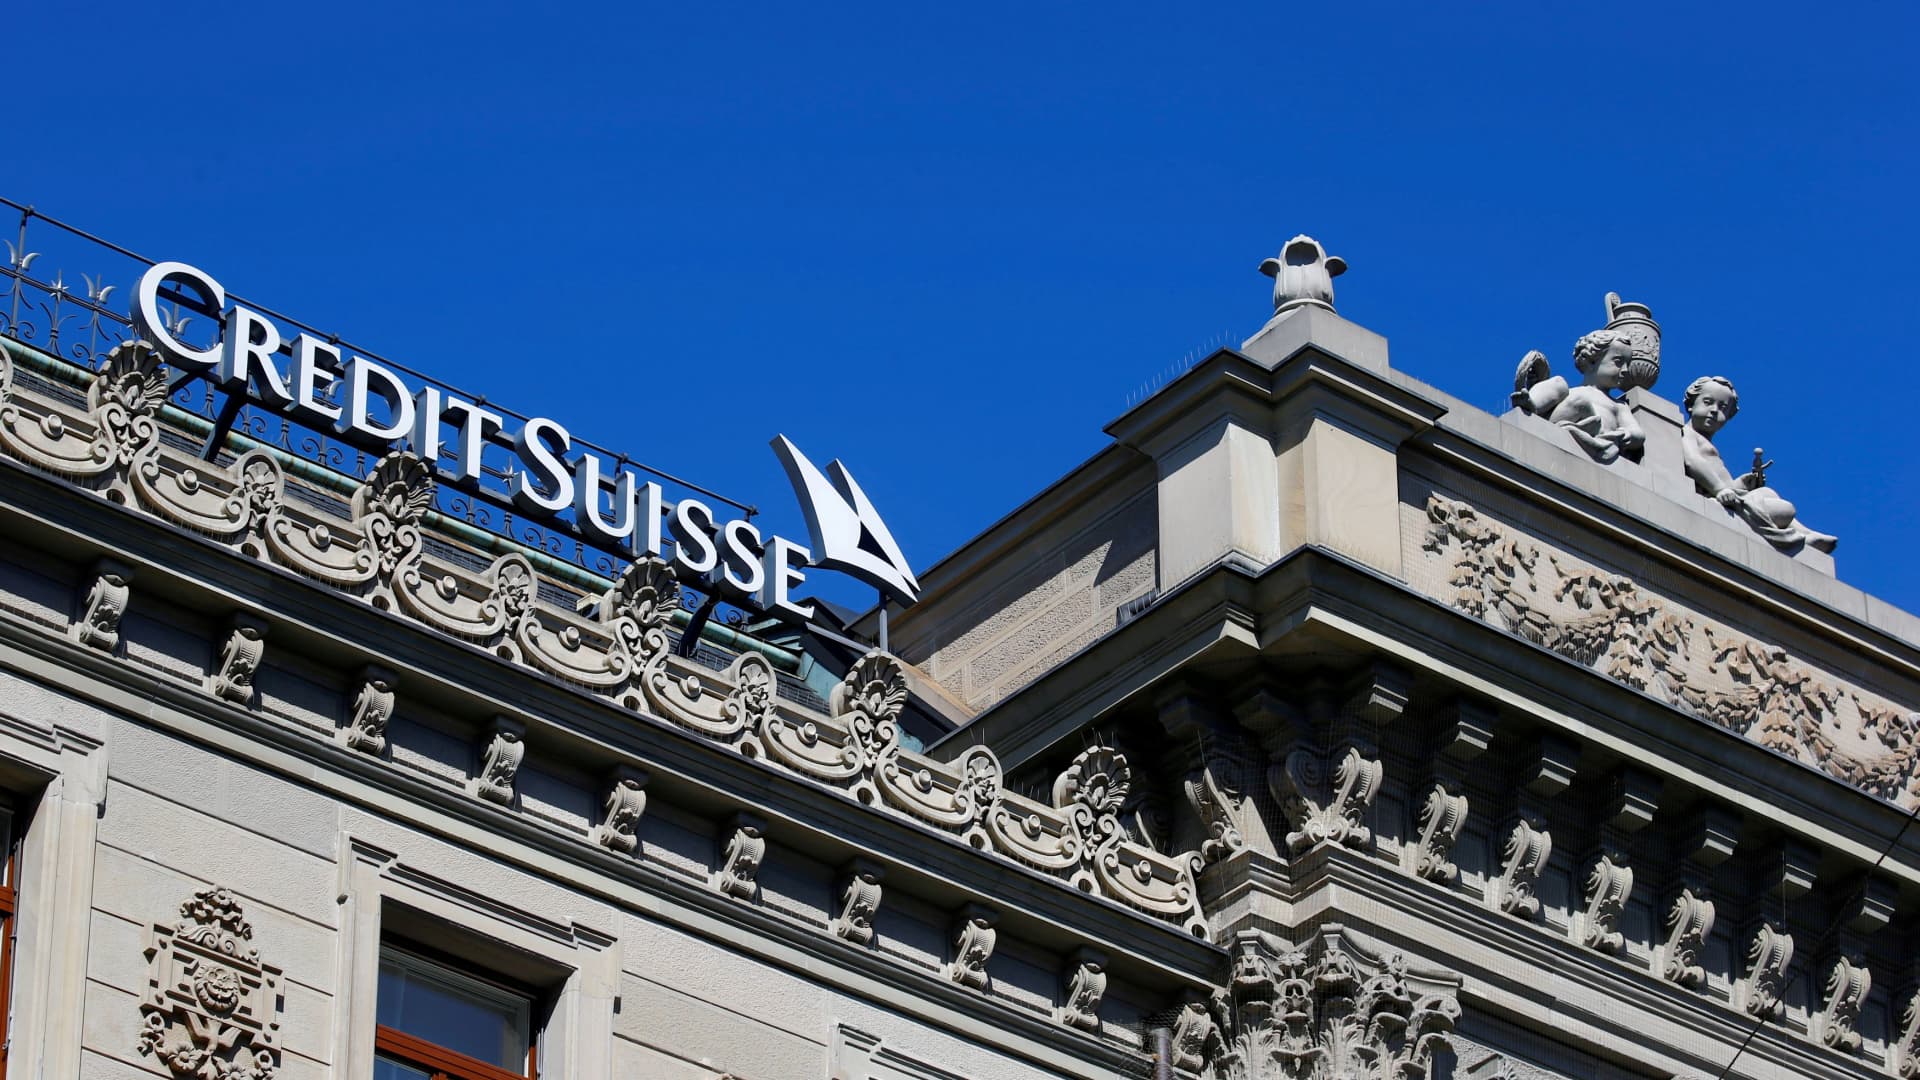 The logo of Swiss bank Credit Suisse is seen at its headquarters in Zurich, Switzerland March 24, 2021.